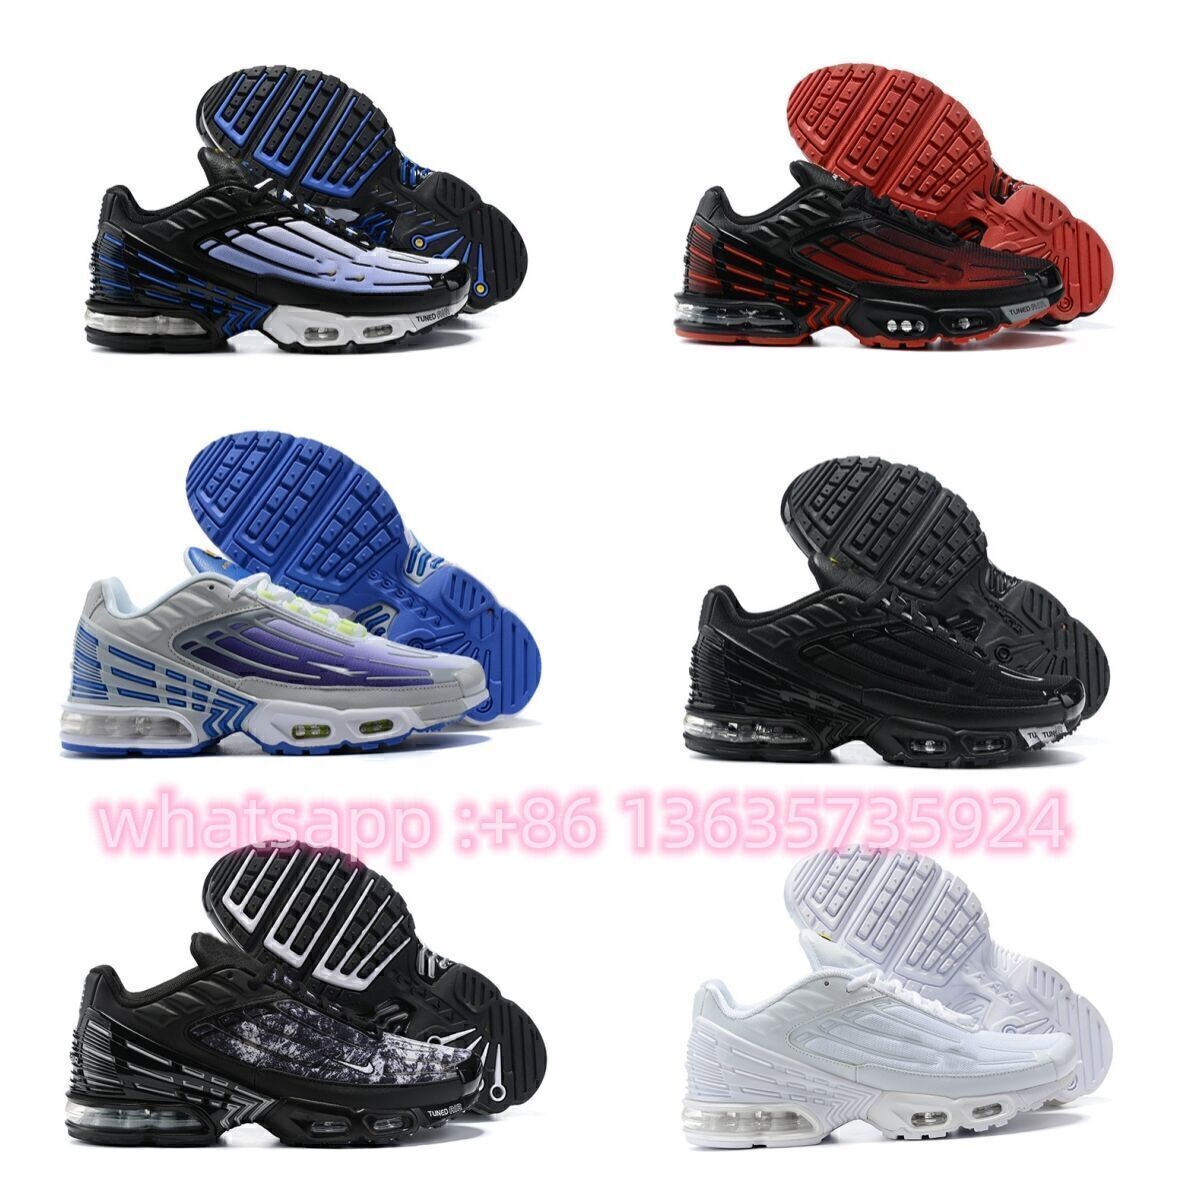 Wholesale Replicas Shoes New Popular Sneaker Yupoo Shoes Sport